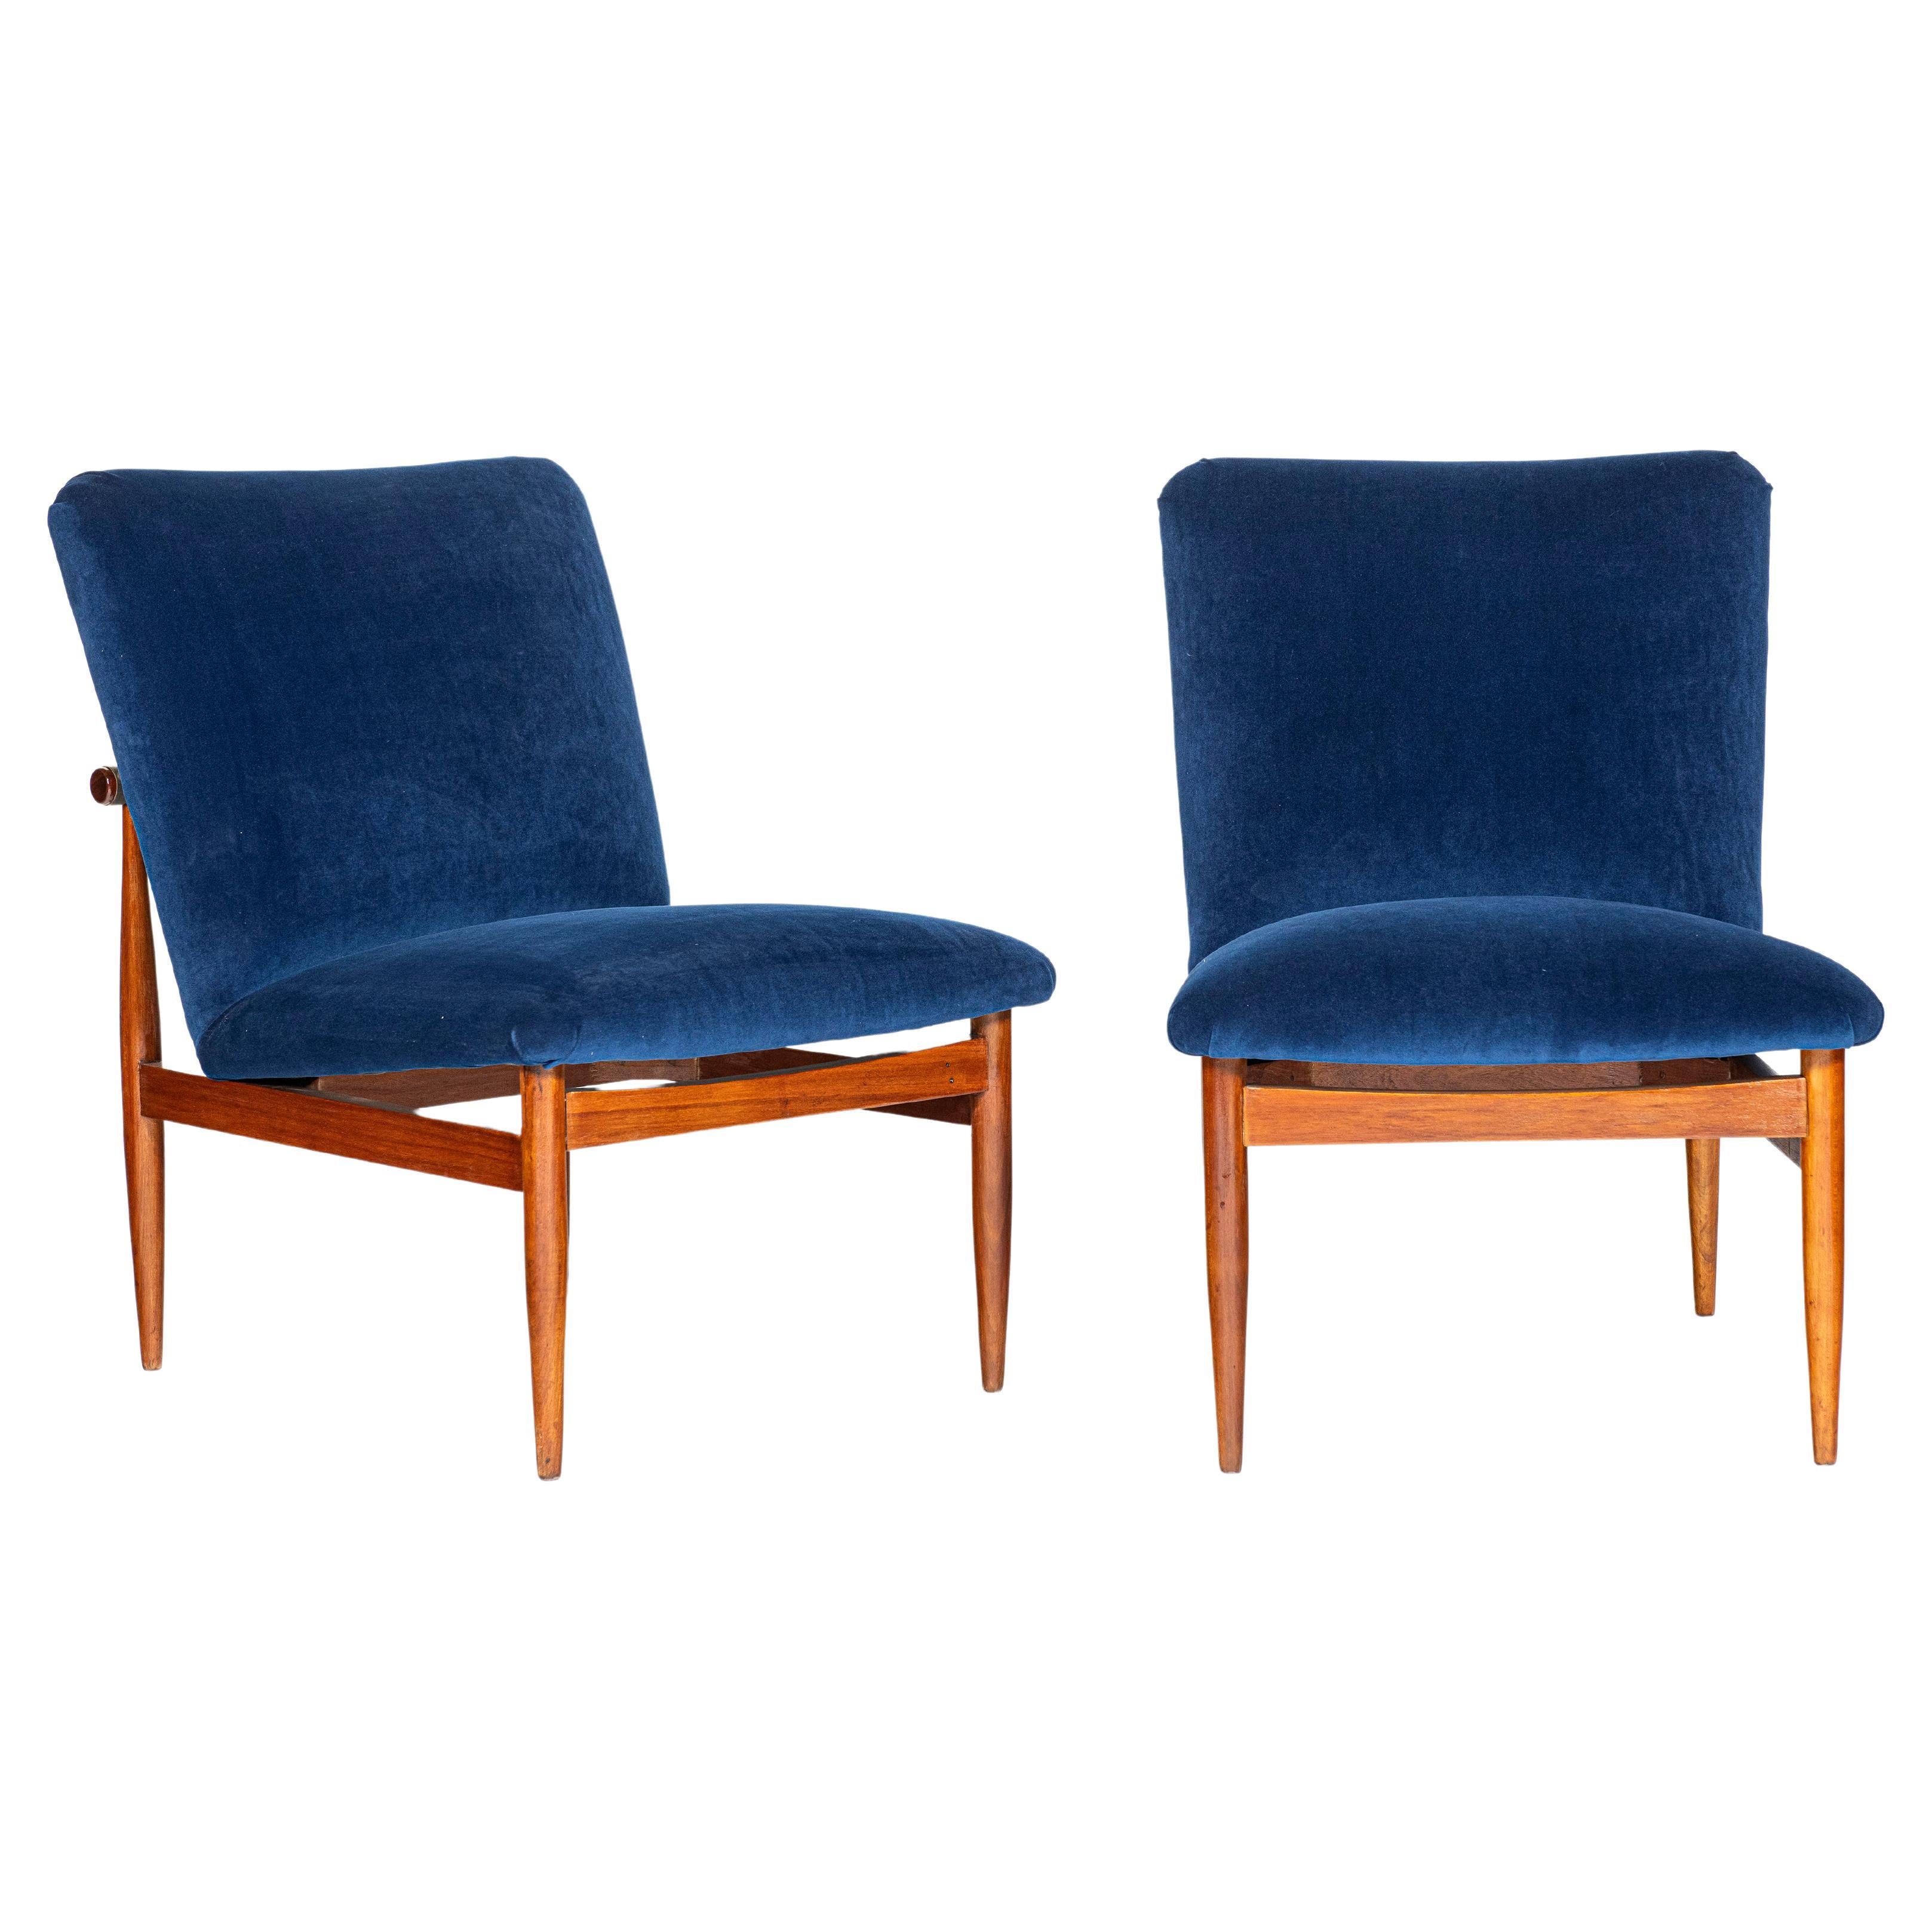 Pair of wood and velvet Scandinavian lounge chairs, circa 1960.
With bronze details.